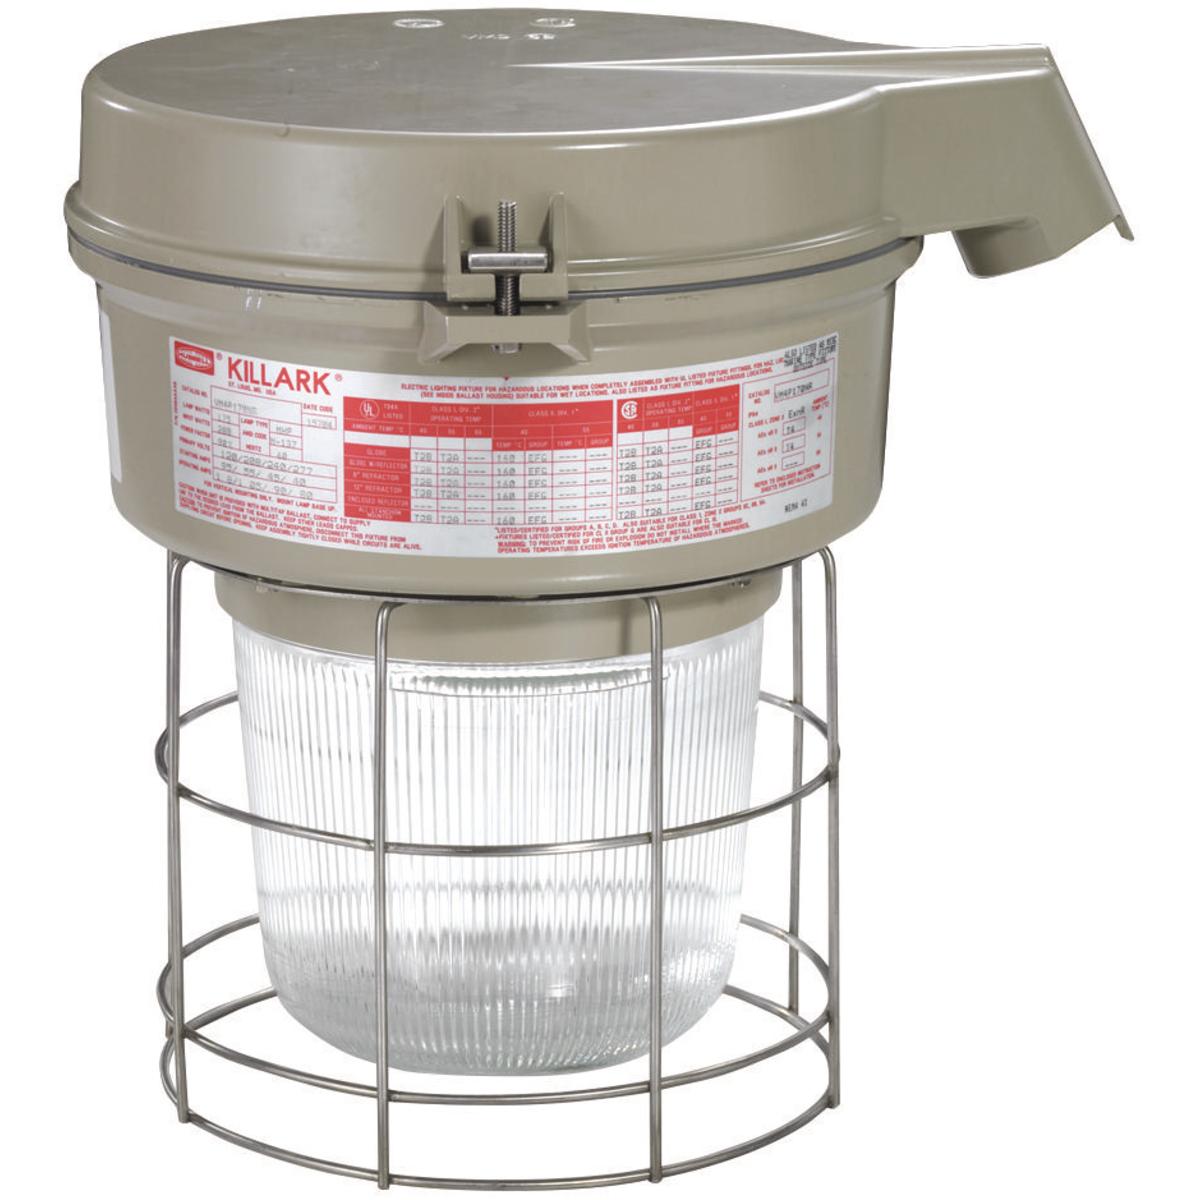 Hubbell VM4P175D5GLG VM4 Series - 175W Metal Halide 480V - 1-1/2" Stanchion 25° - Globe and Guard  ; Ballast tank and splice box – corrosion resistant copper-free aluminum alloy with baked powder epoxy/polyester finish, electrostatically applied for complete, uniform corrosio